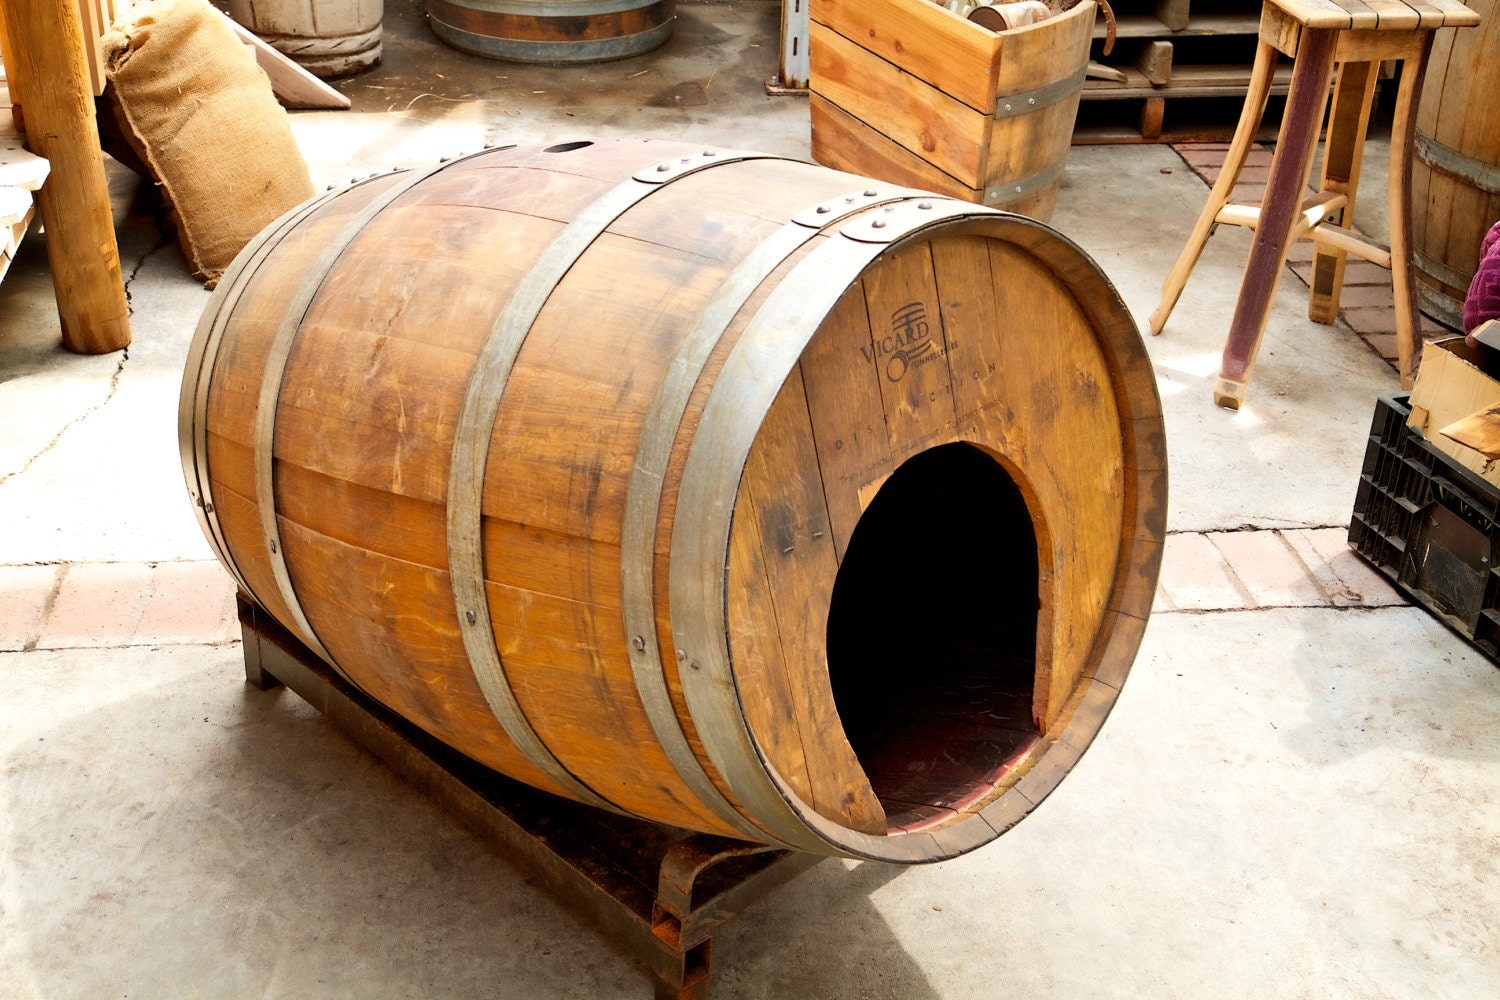 Rustic pet house made from a wine or whiskey barrel. Sits on a